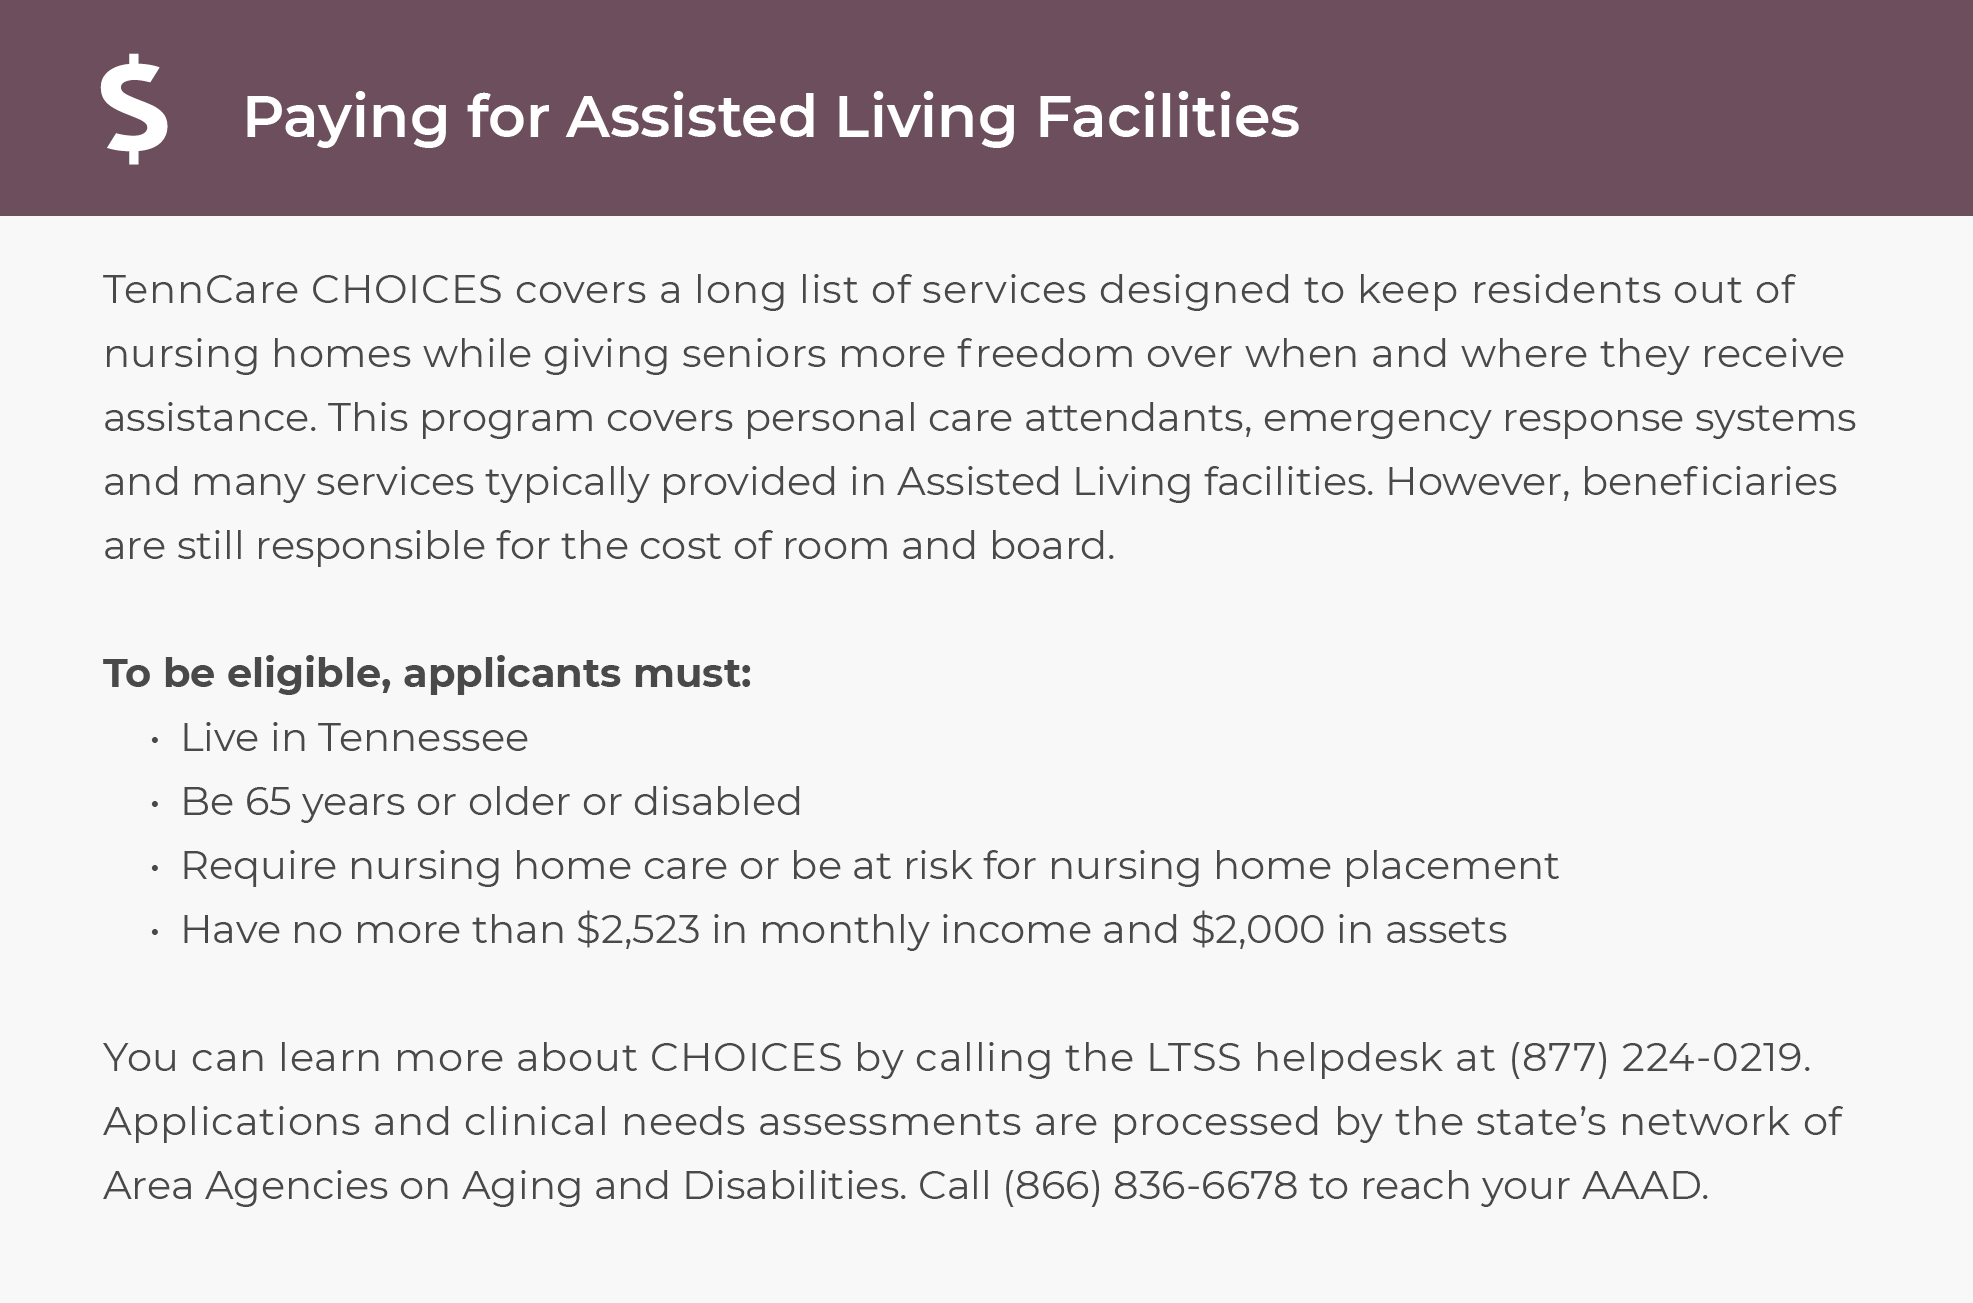 Paying for Assisted Living Facilities in Tennessee